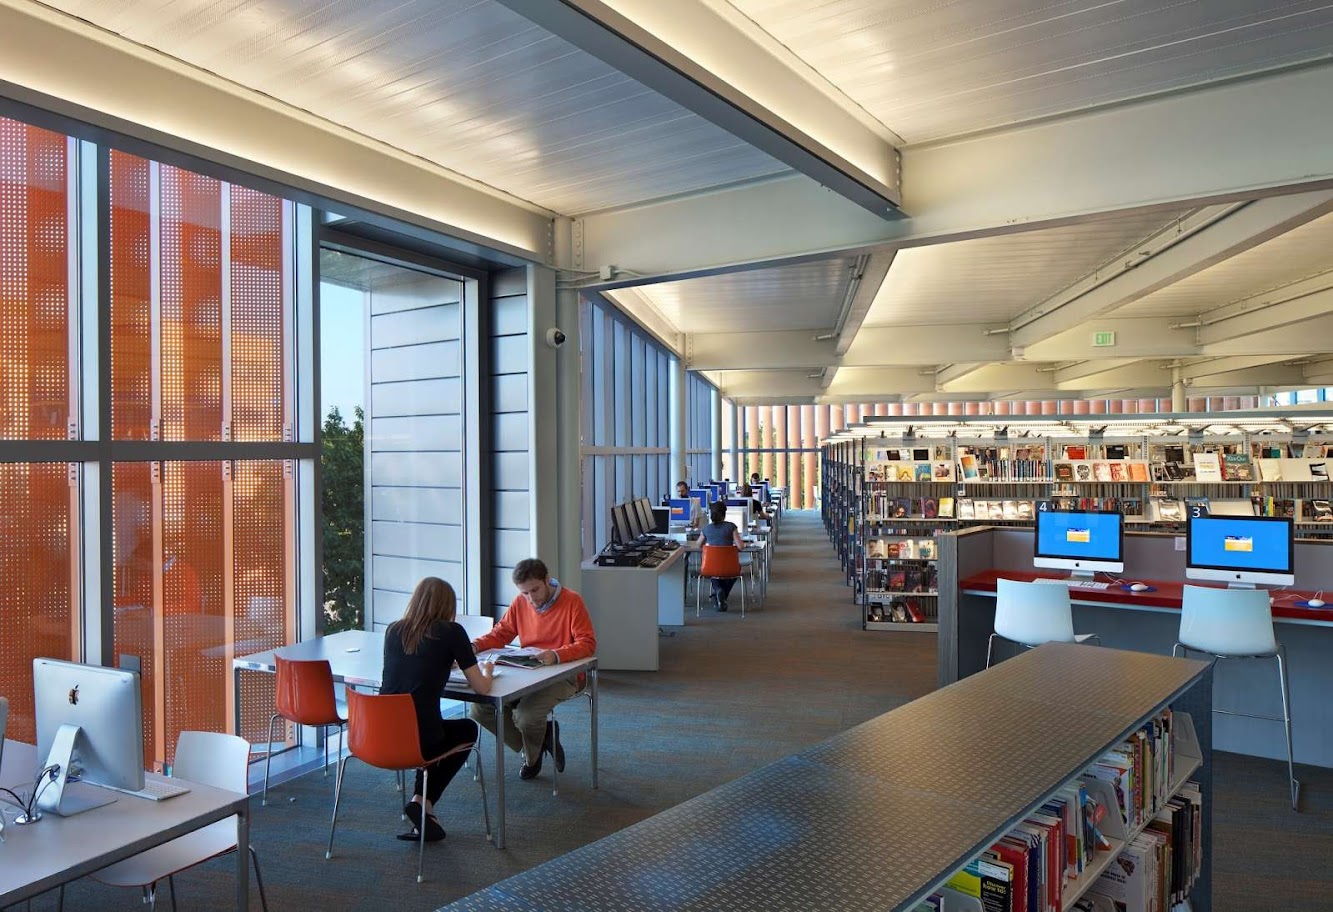 Tenley Friendship Library by the Freelon Group Architects